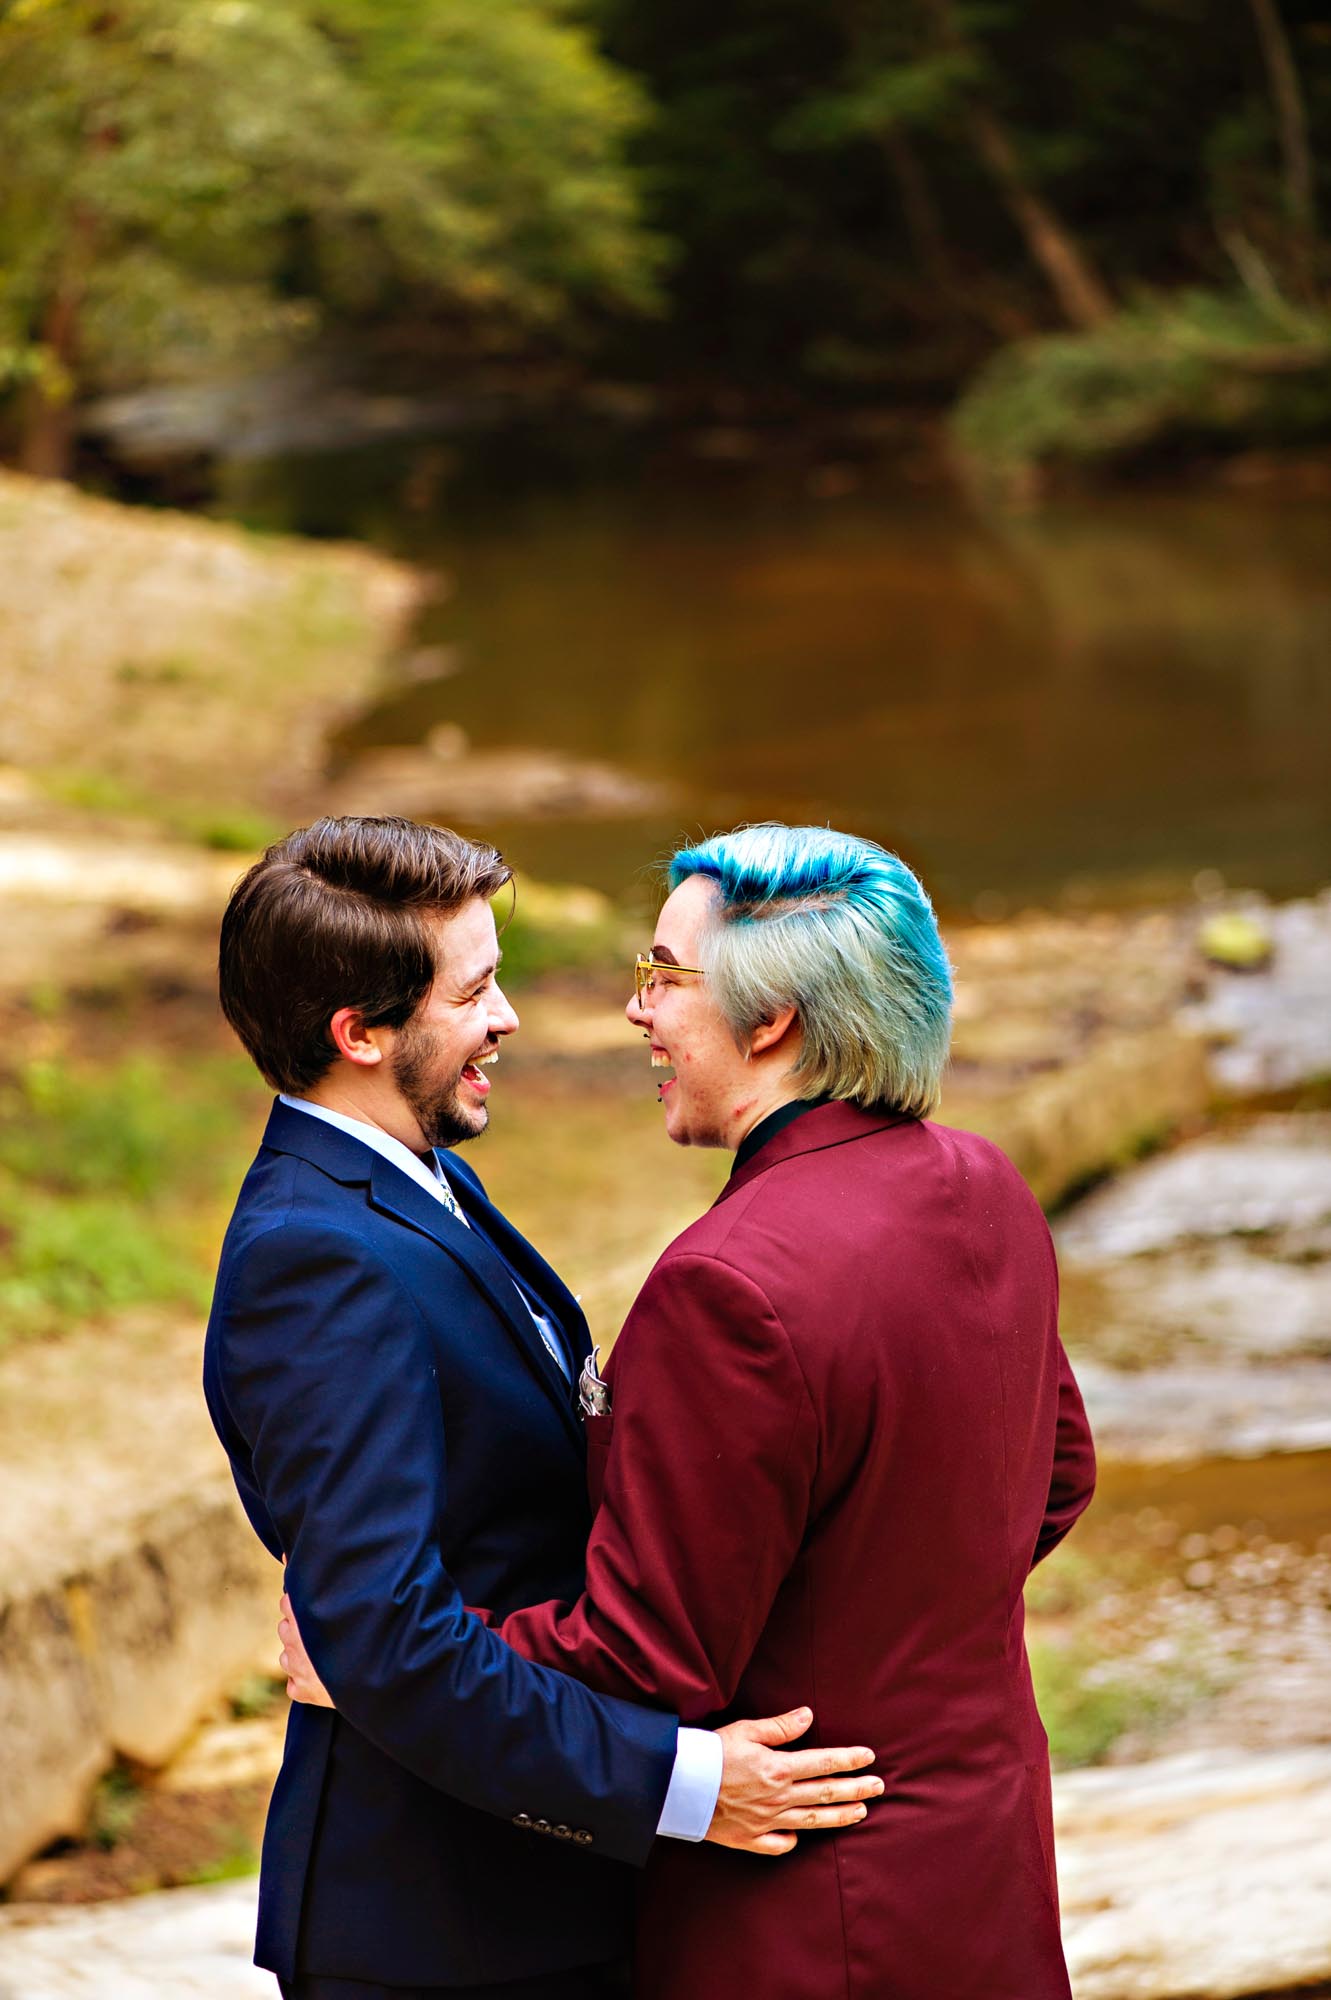 LGBTQ+ couple celebrates their magical DIY wedding at North Carolina vineyard. Photo by Brooke Mayo Photography. Featured on Equally Wed, the leading LGBTQ+ wedding magazine and vendor directory.